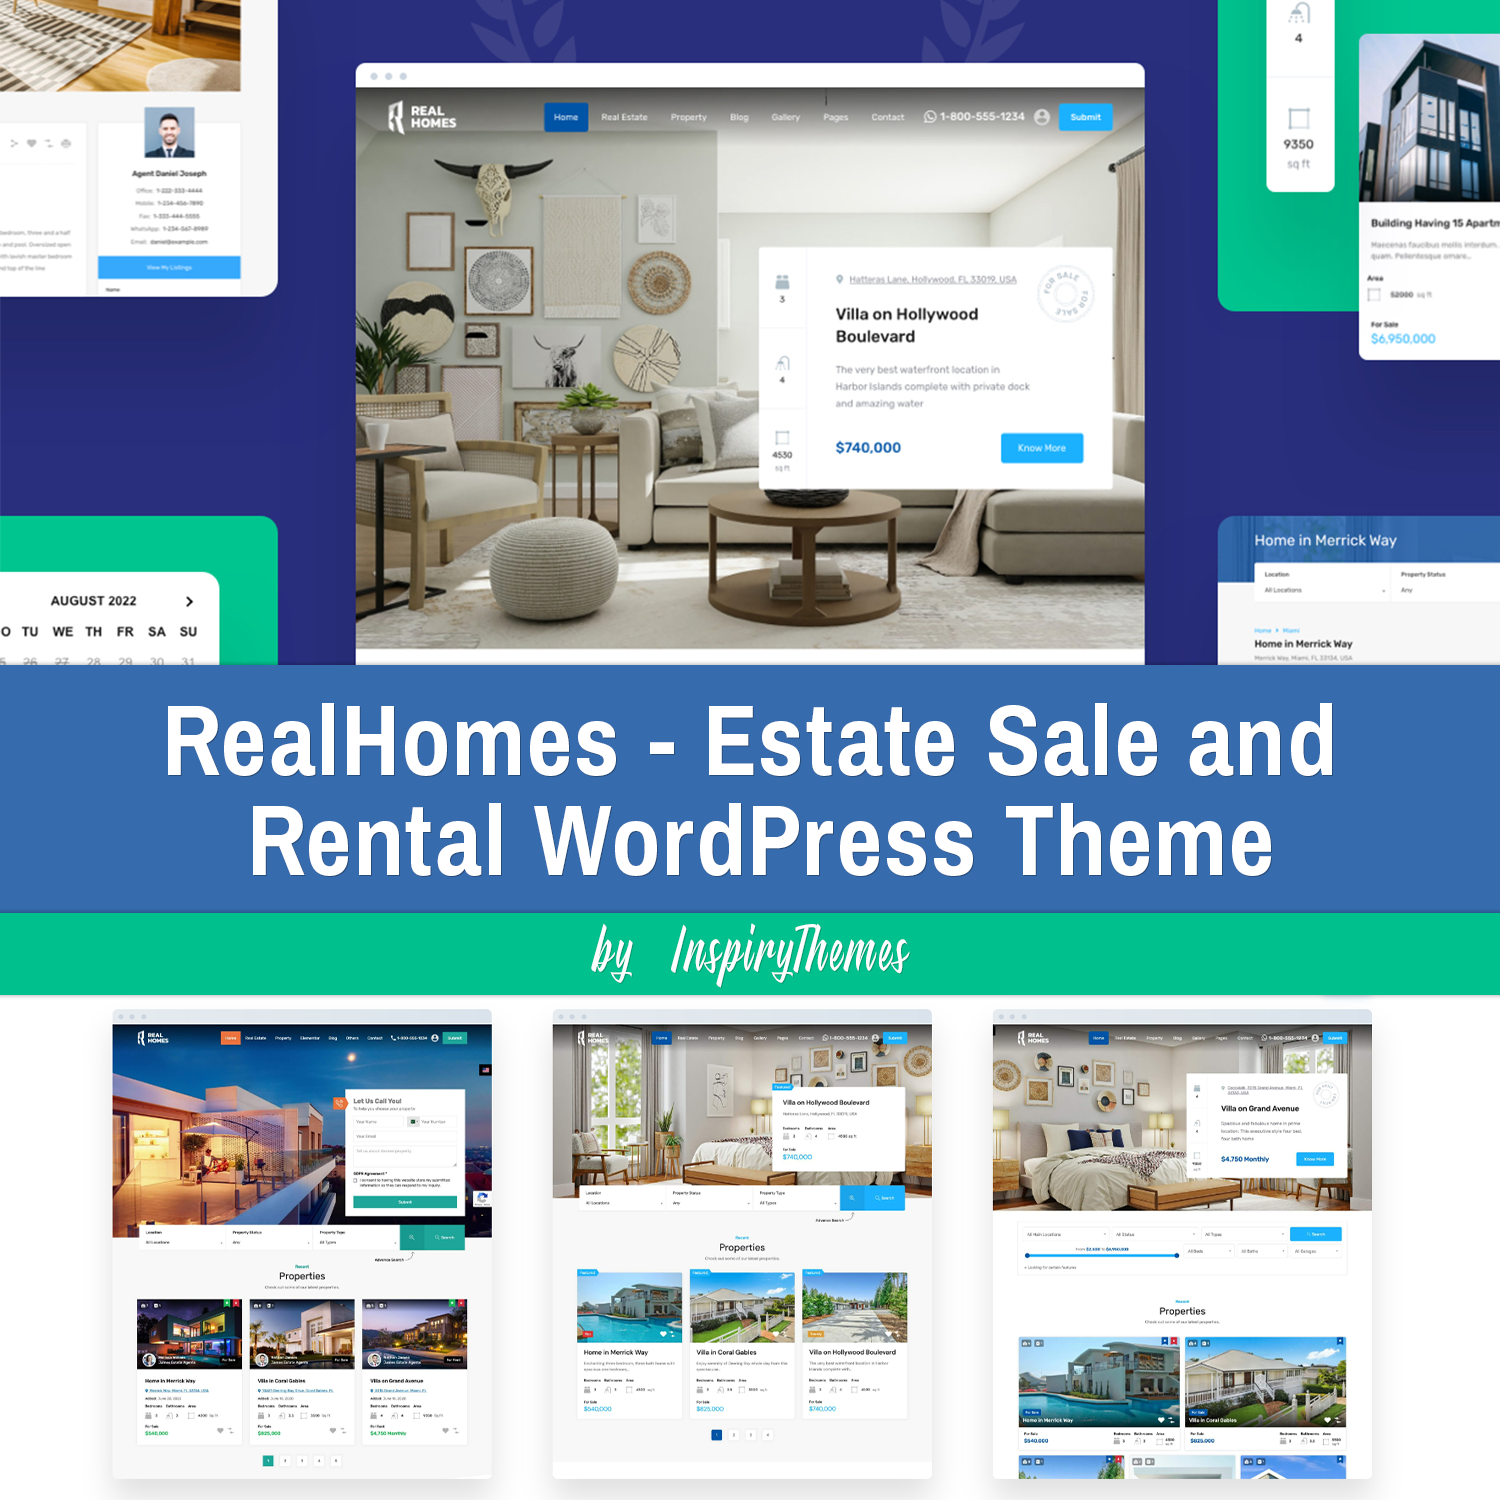 Images with realhomes estate sale and rental wordpress theme.